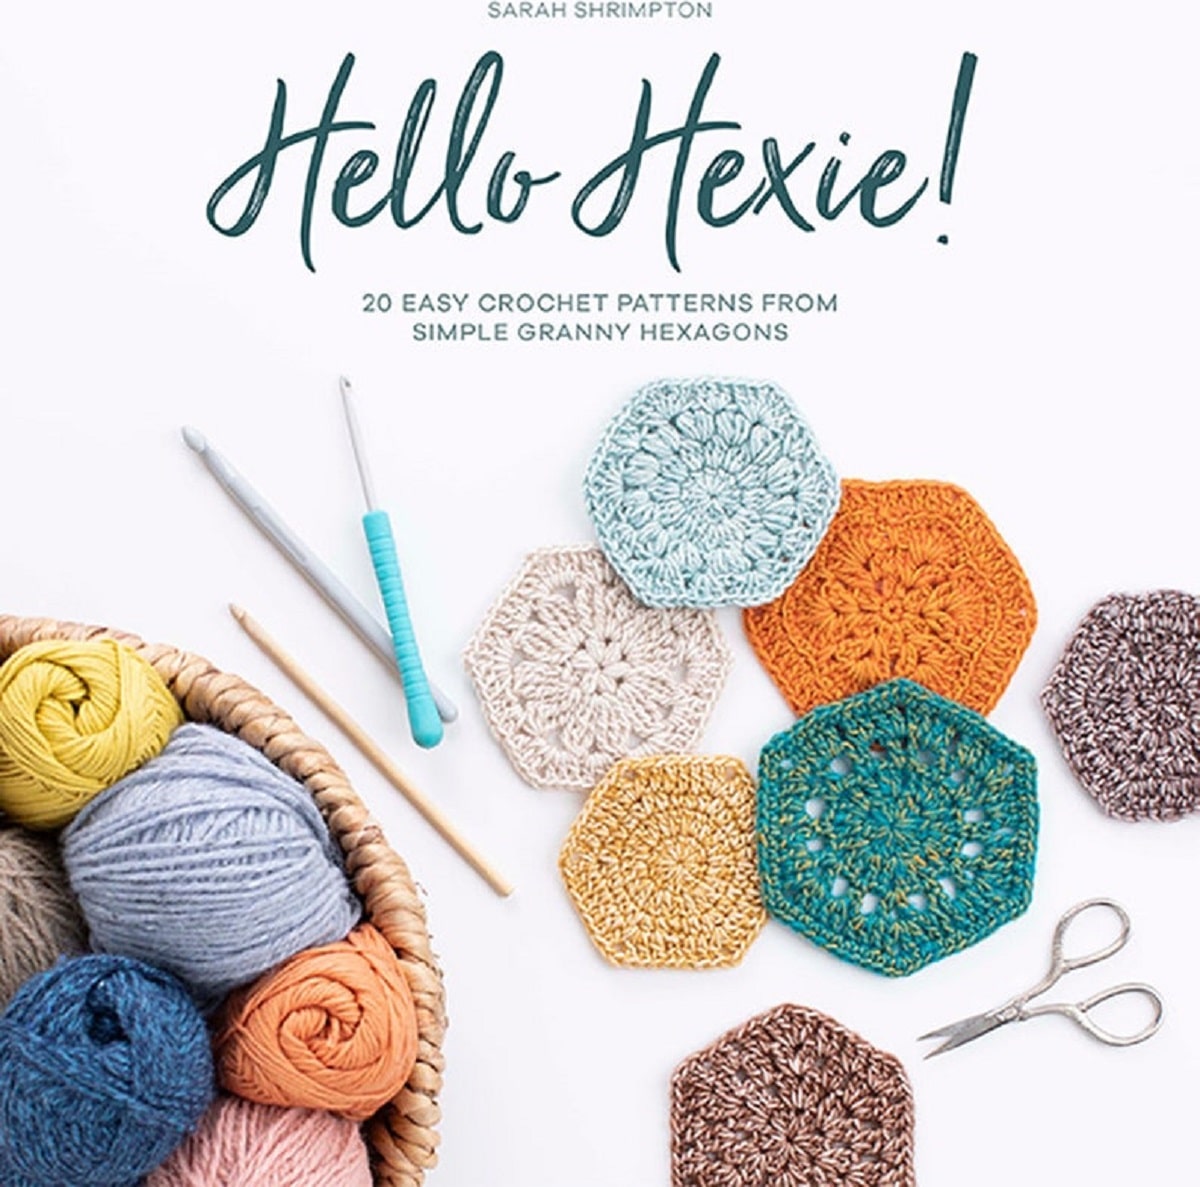 Blue, teal, orange, yellow, and cream crochet hexagon shapes next to some crochet hooks and a bowl of yarn in the same colors.